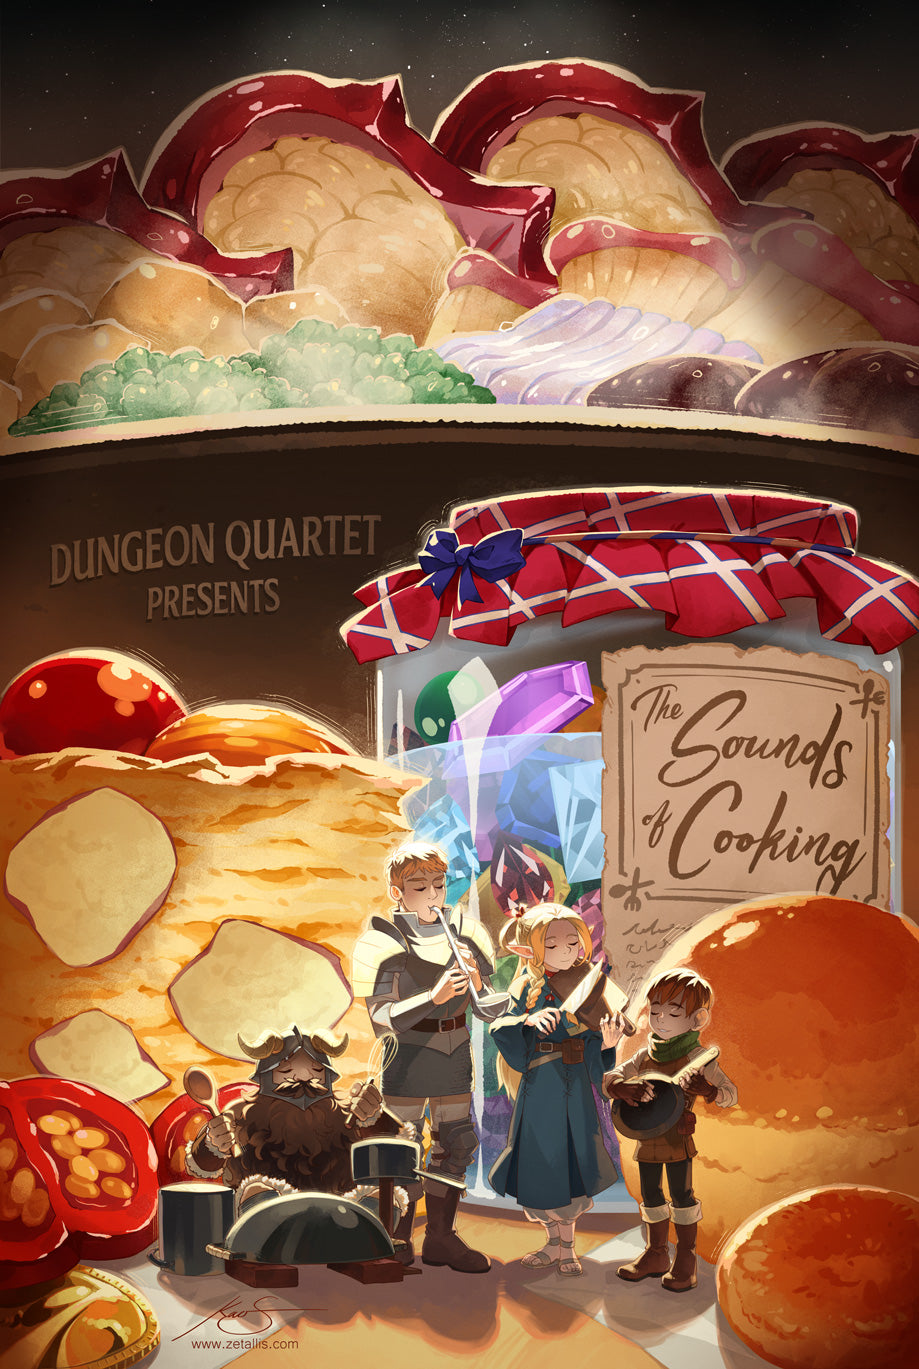 Dungeon Meshi Sounds of Cooking Print